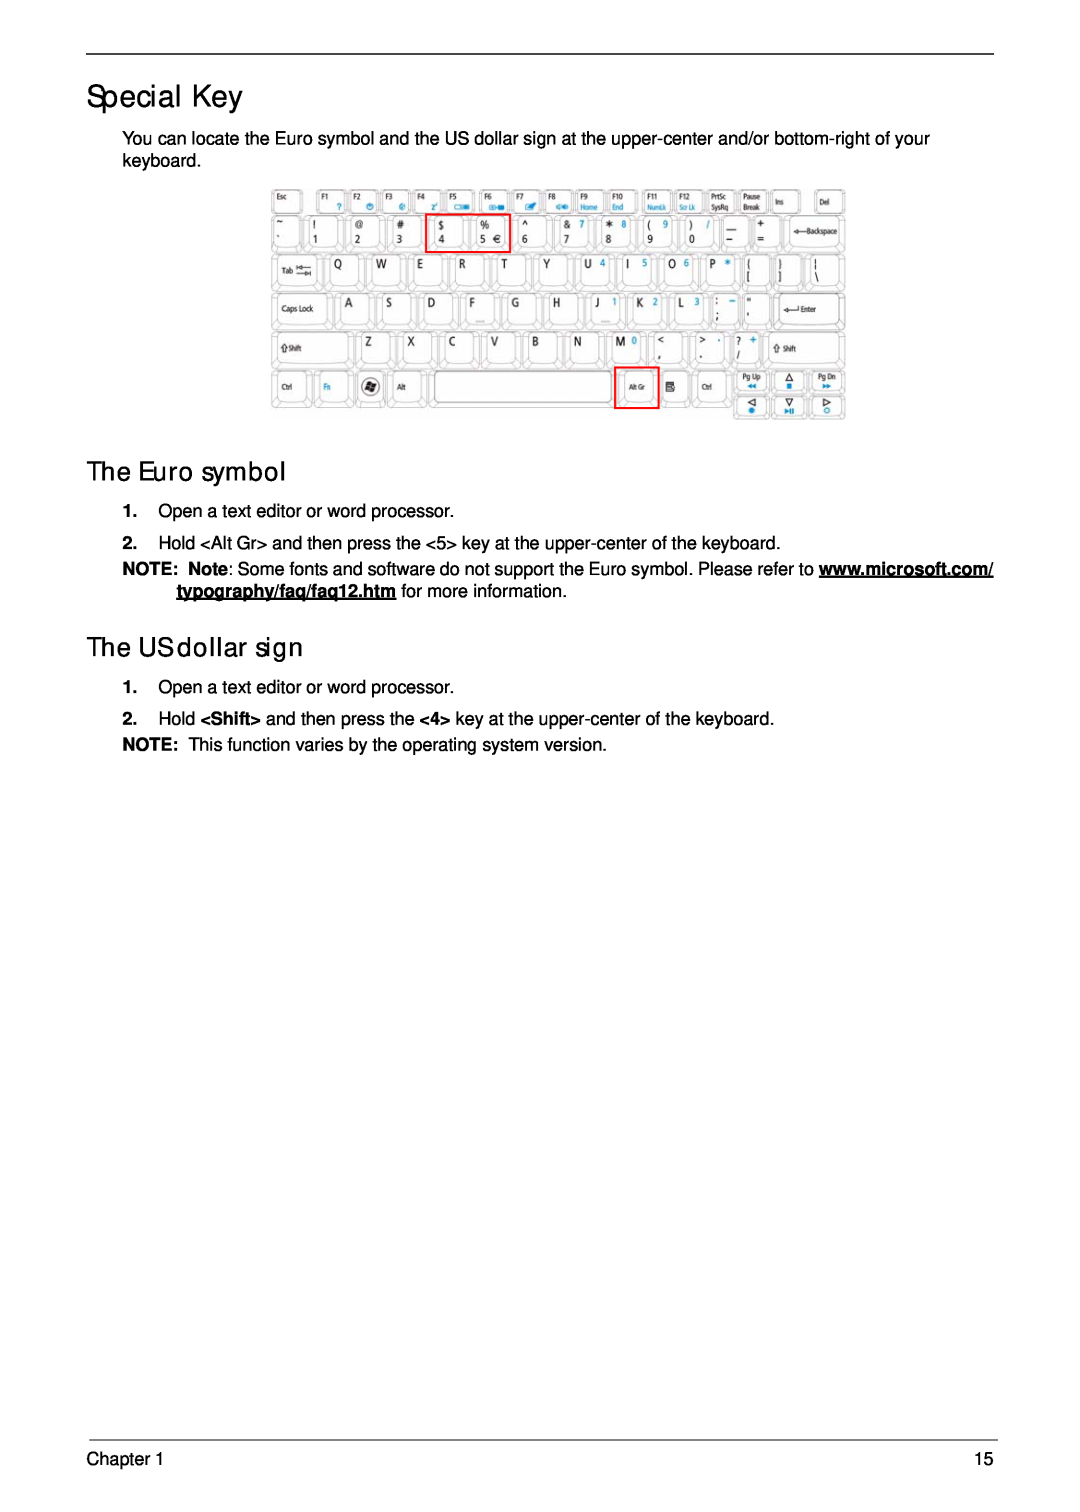 Acer 5532 manual Special Key, The Euro symbol, The US dollar sign 